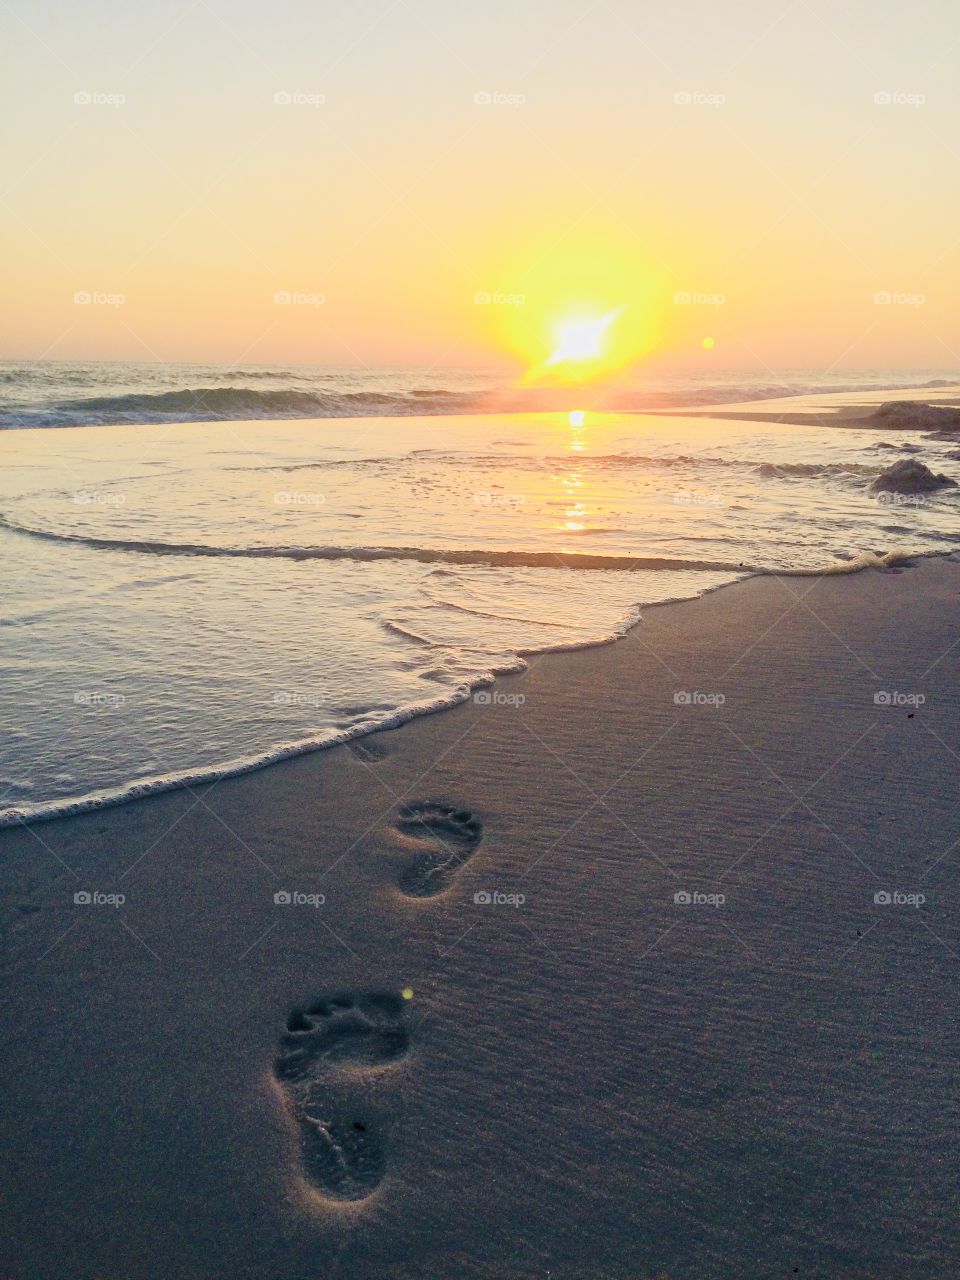 Footprints in the sand. “My precious Child, I love you and will never leave you. When you saw one set of footprints, it was then that I carried you.” -Mary Stevenson